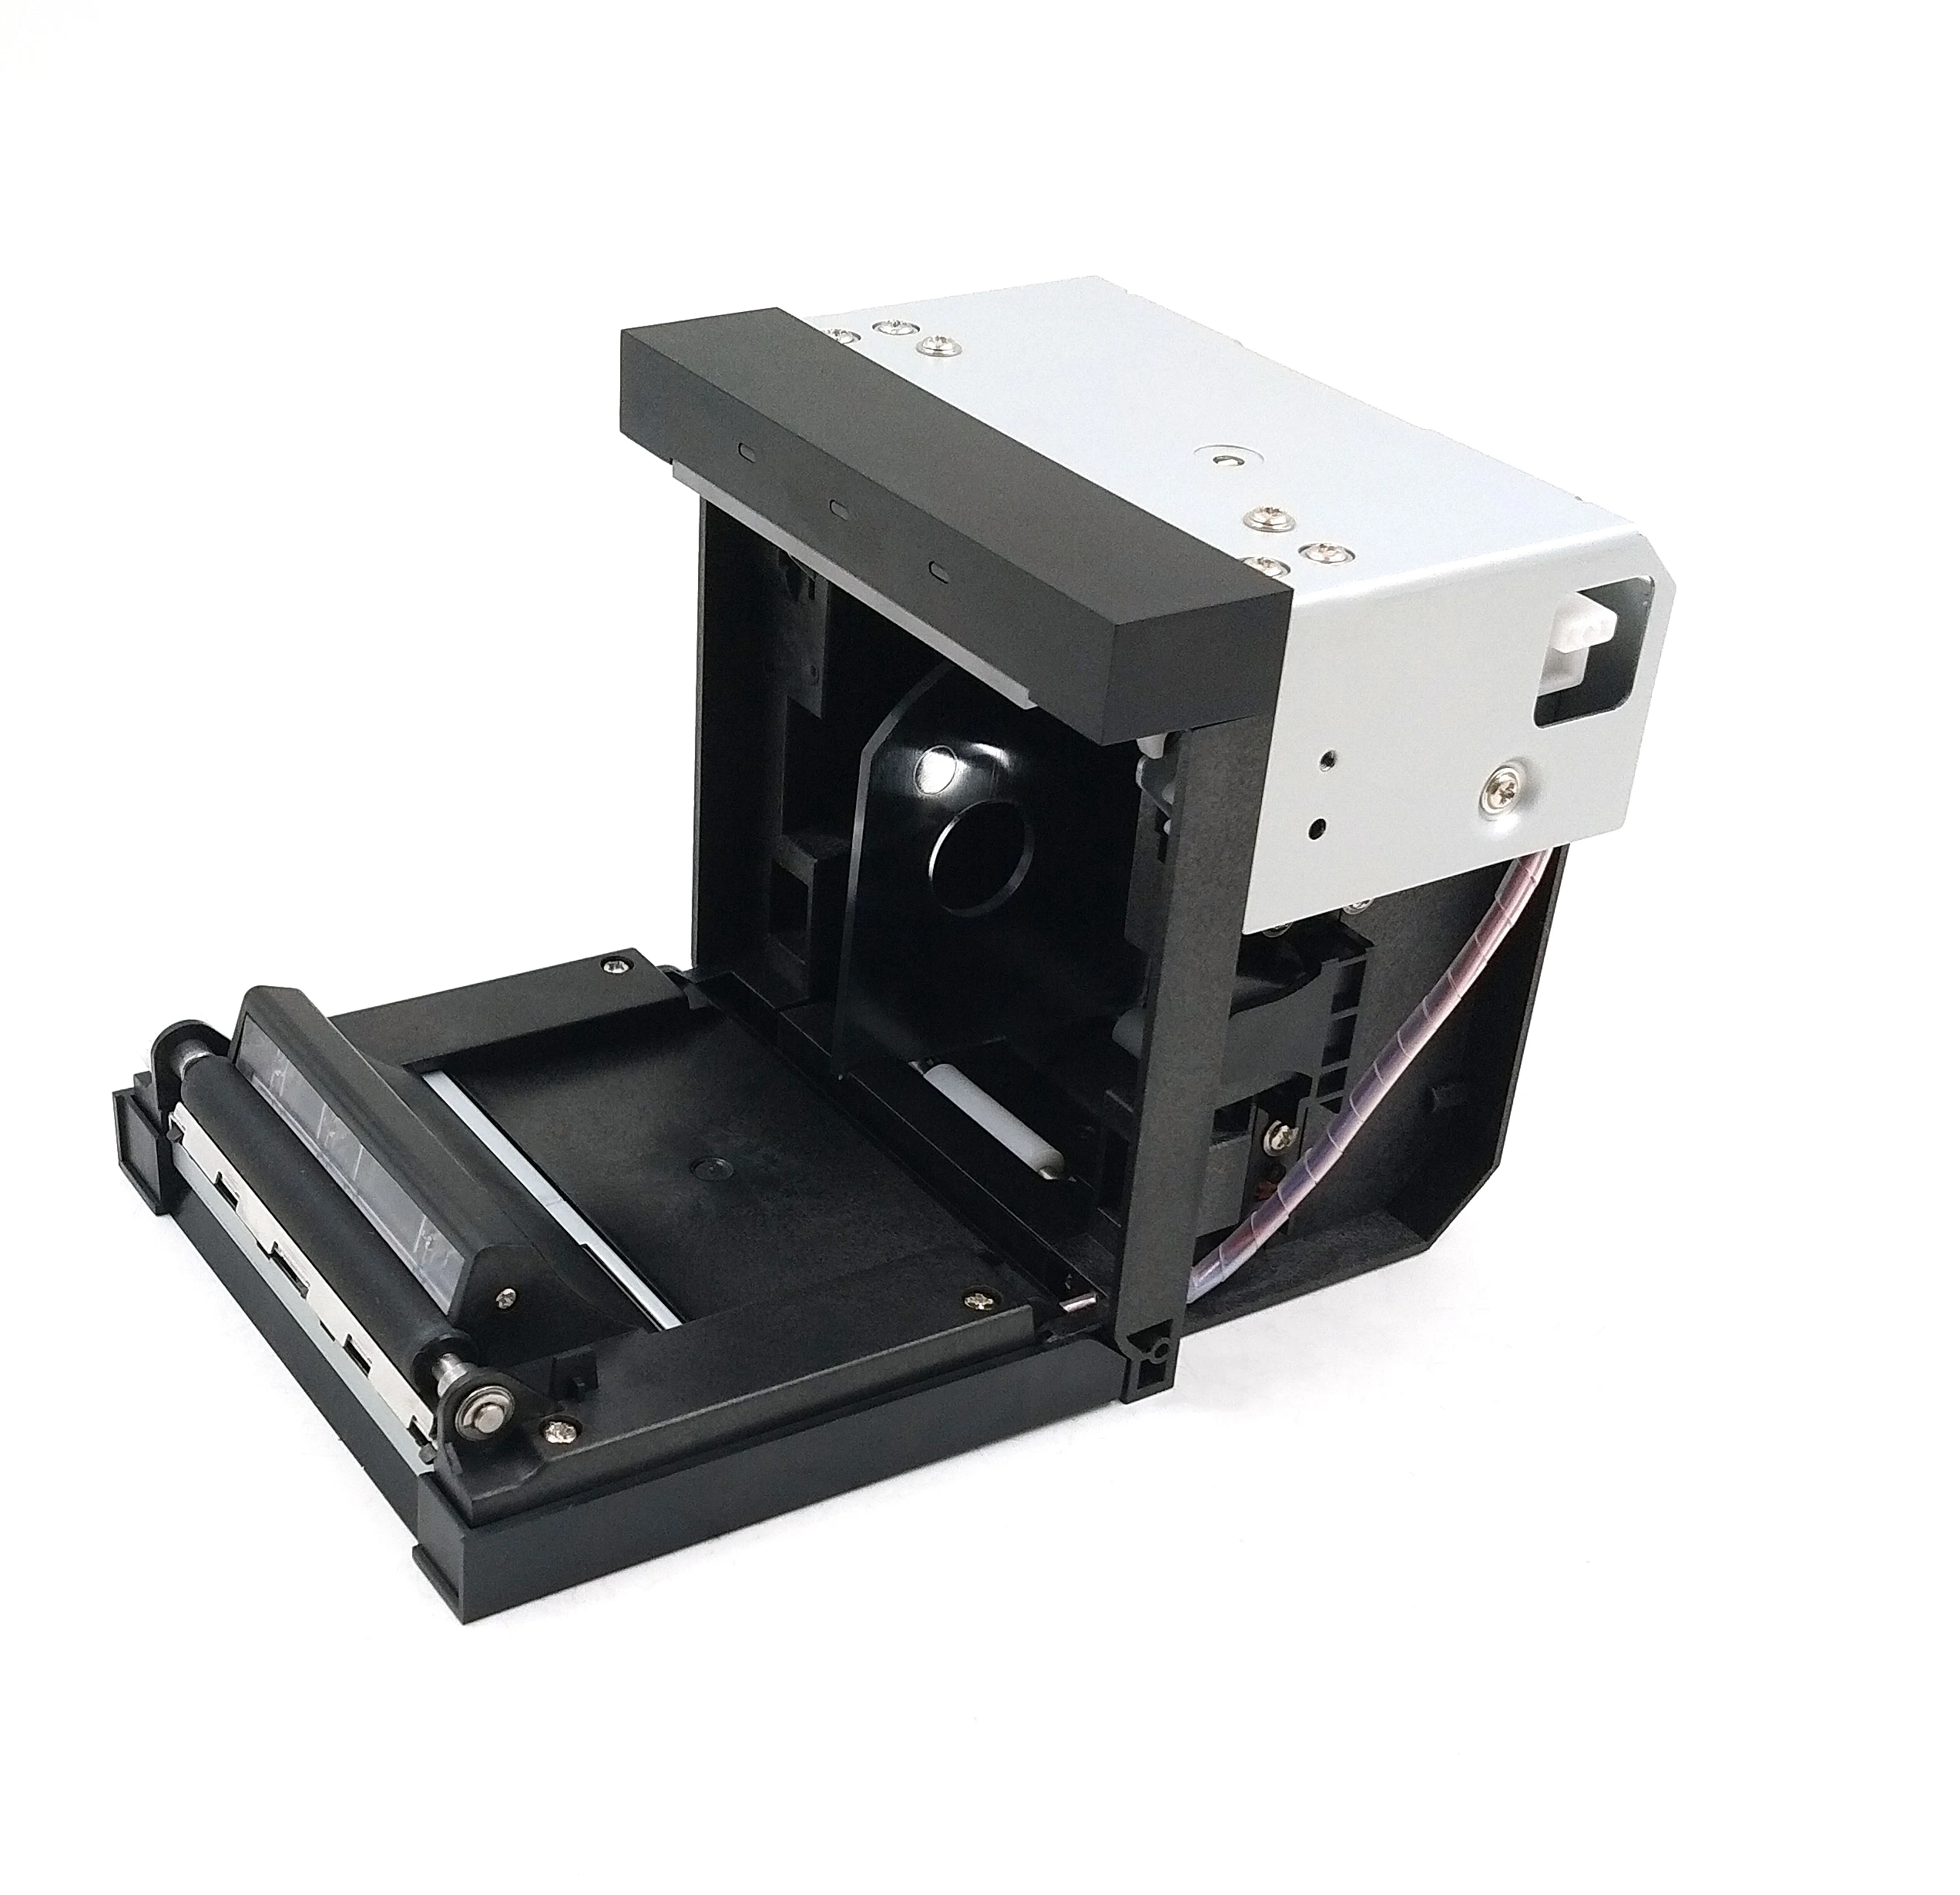 Kiosk Panel mounted 80mm thermal receipt printer with auto cutter for pos terminal printer barcode printer